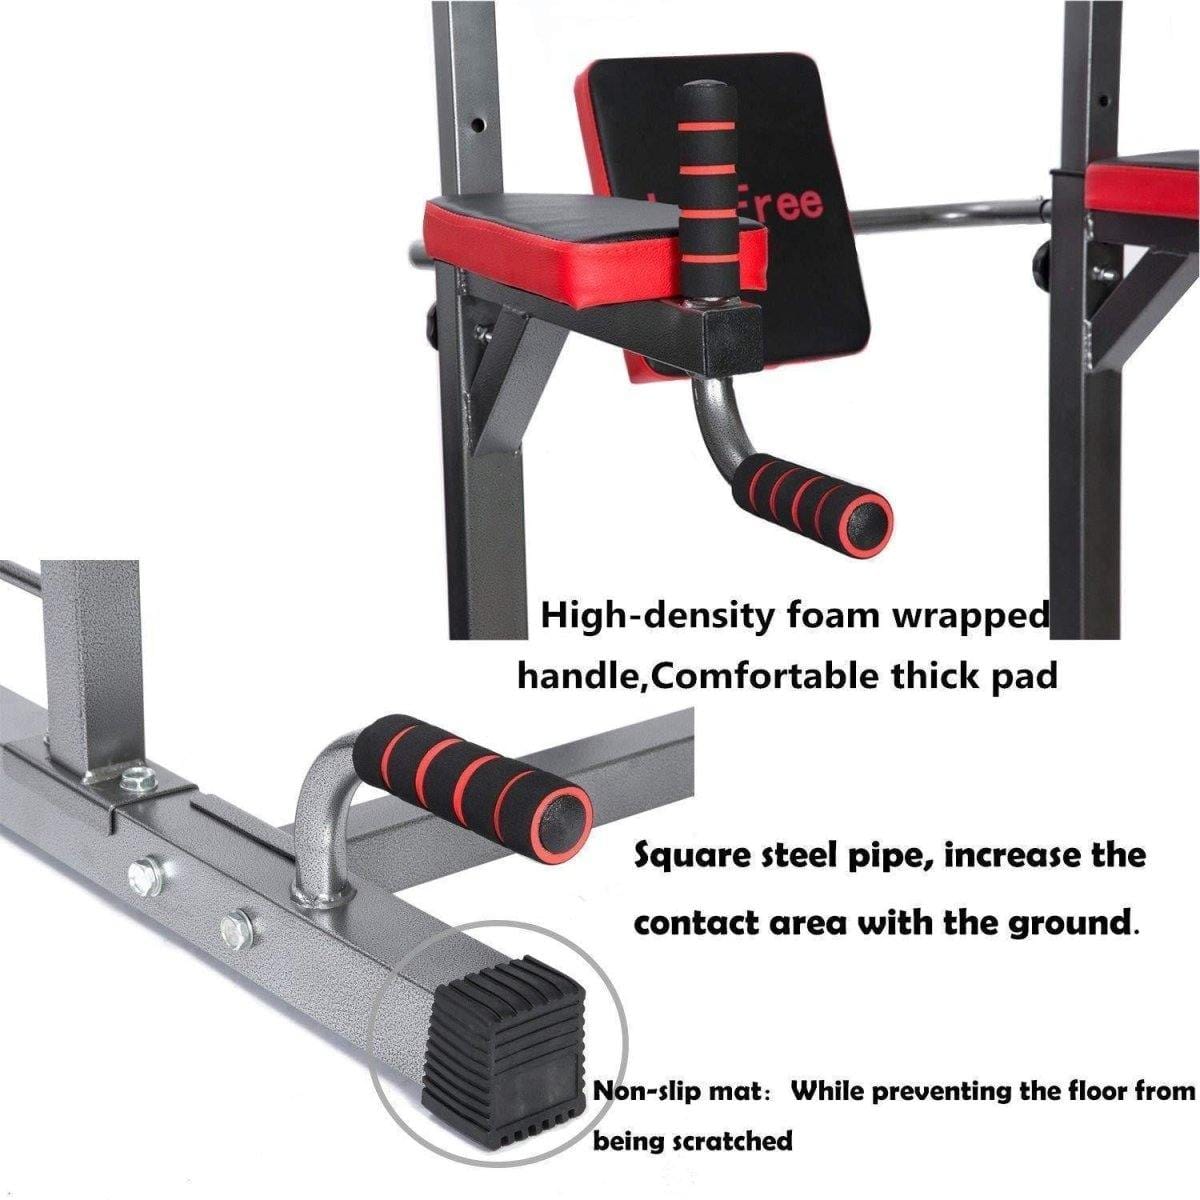 Tower of power multi-function pull up bar station